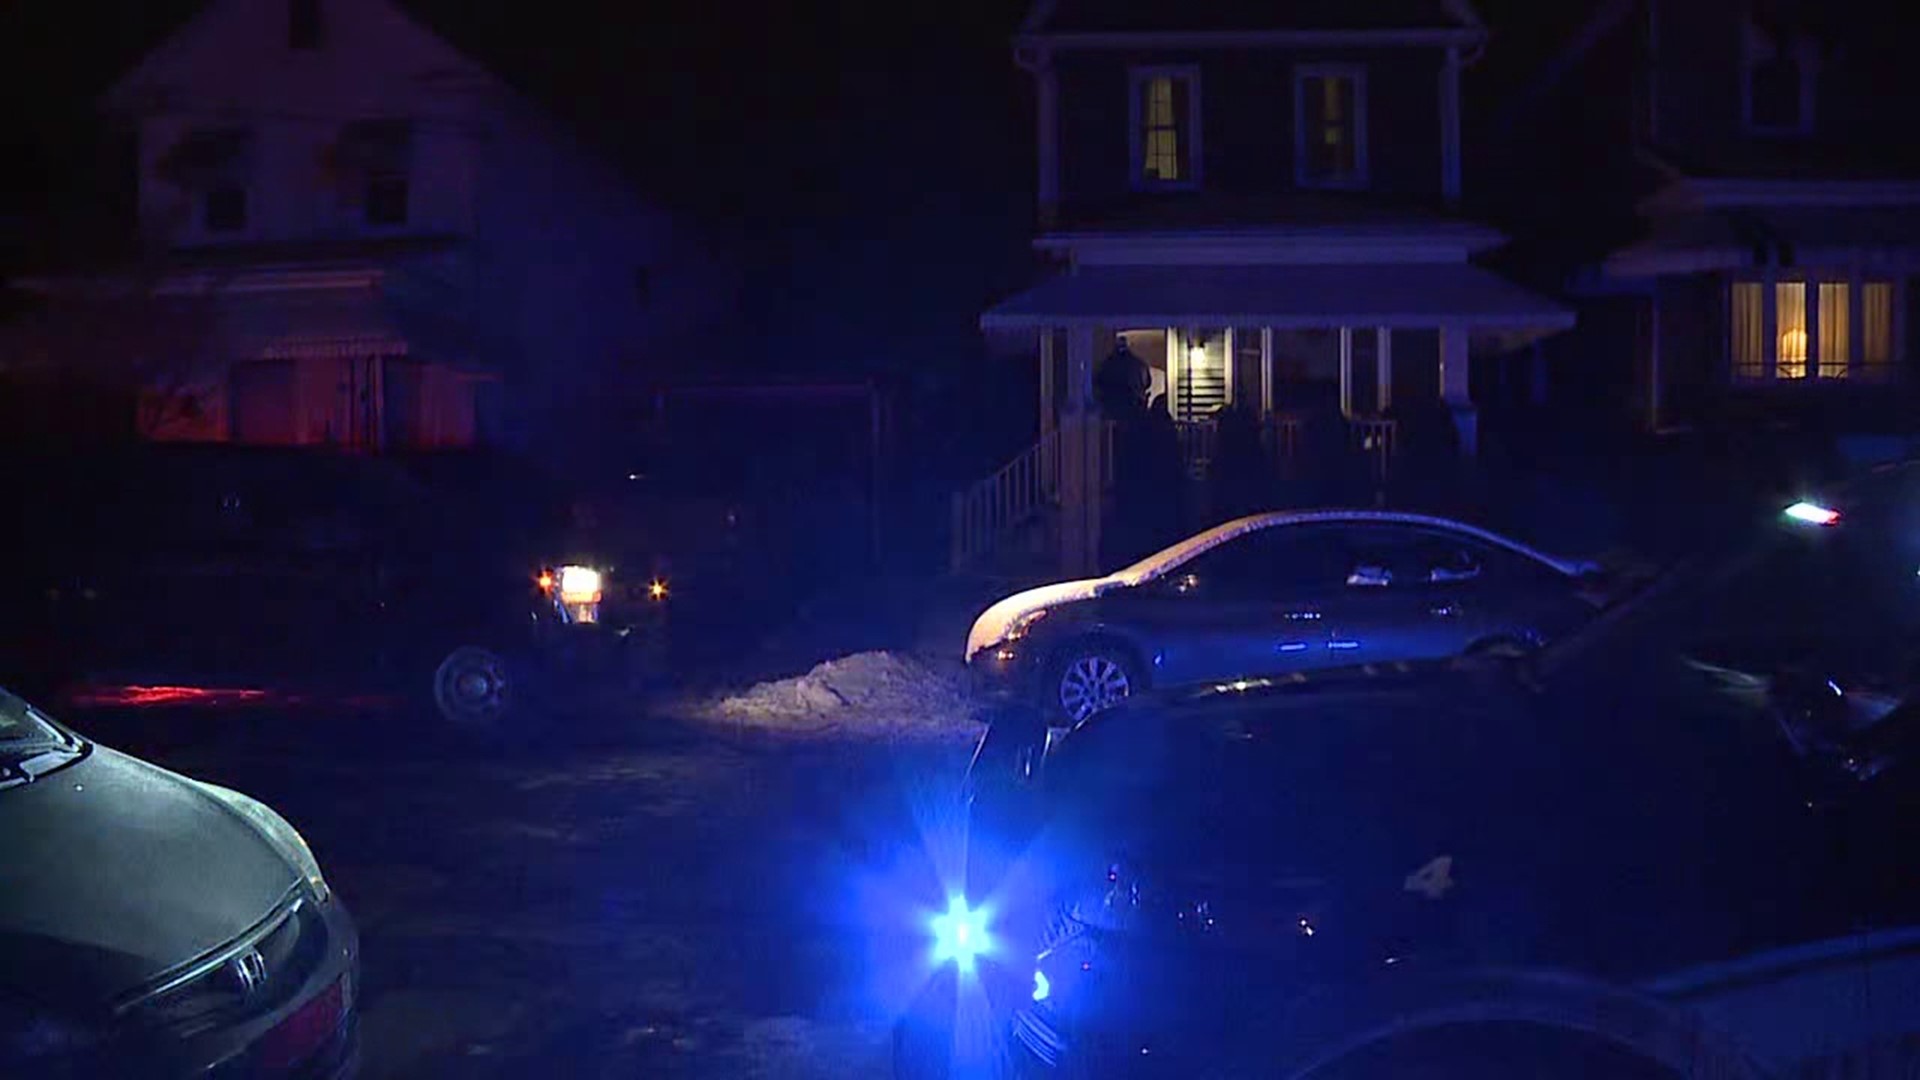 Police responded to a home along East Union Street in Nanticoke around 8:30 p.m. Monday.